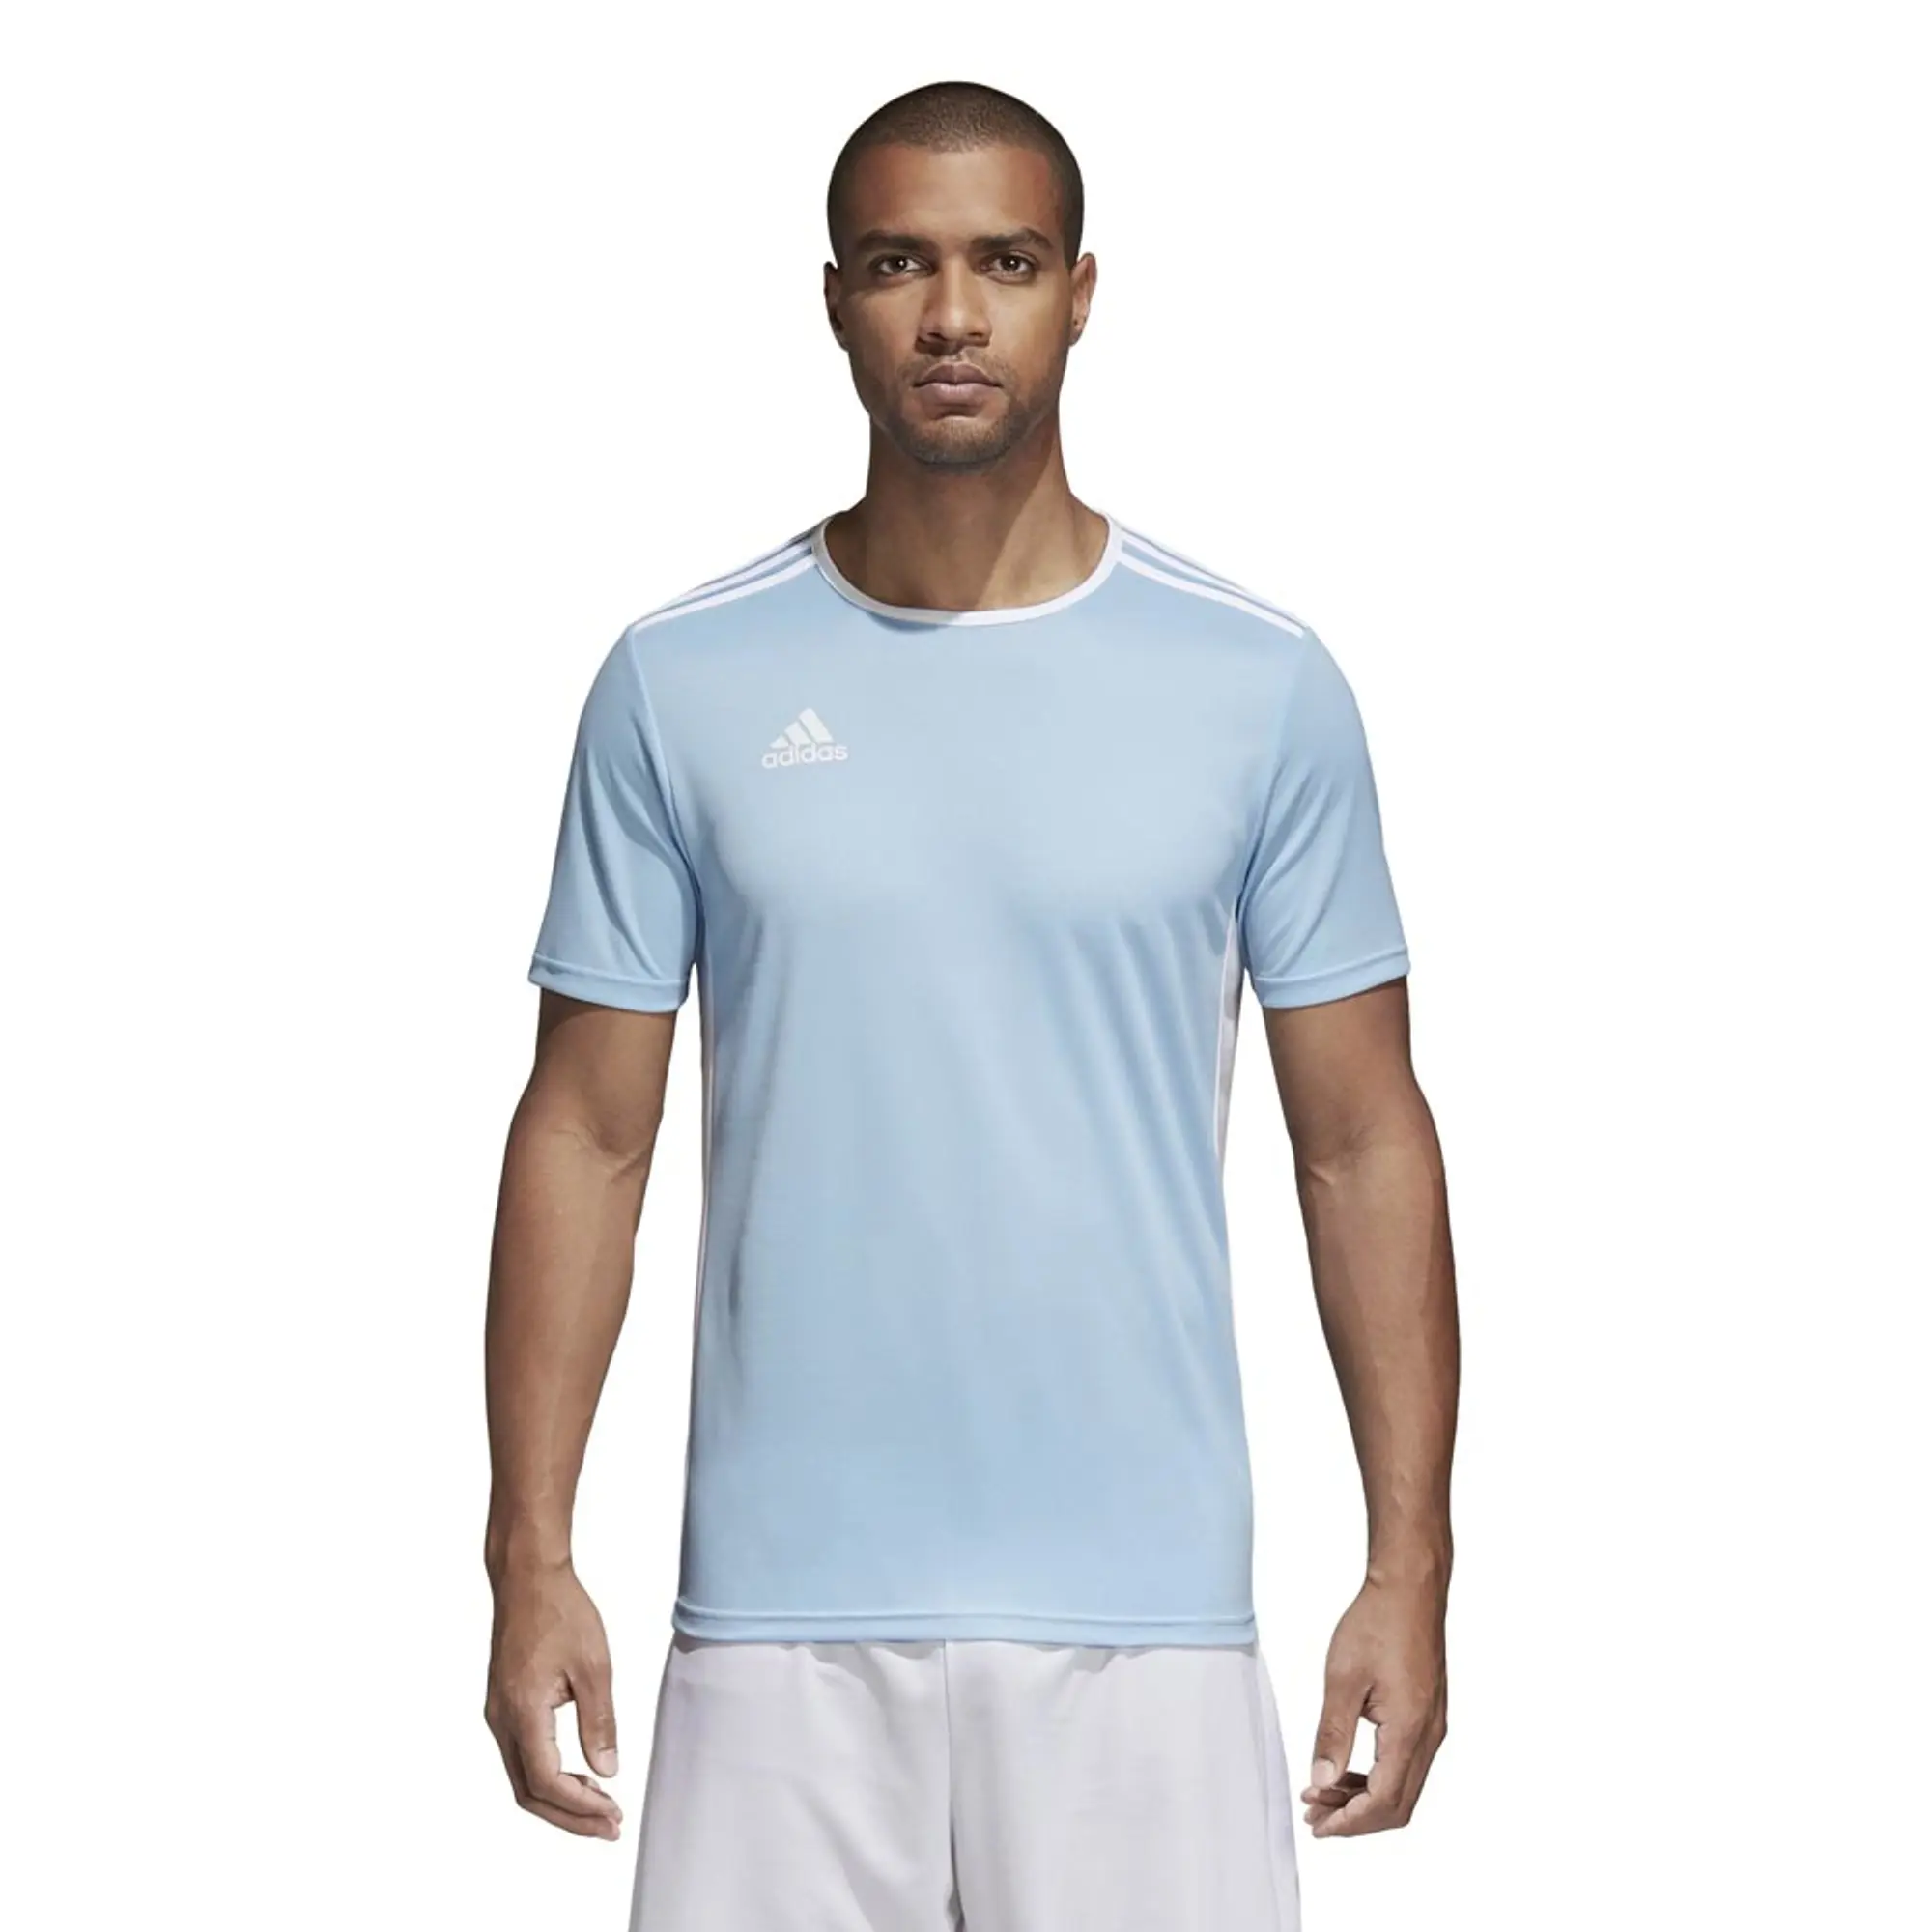 Snoep Meander Opstand Adidas Entrada 18 SS Jersey | CD8414 | FOOTY.COM